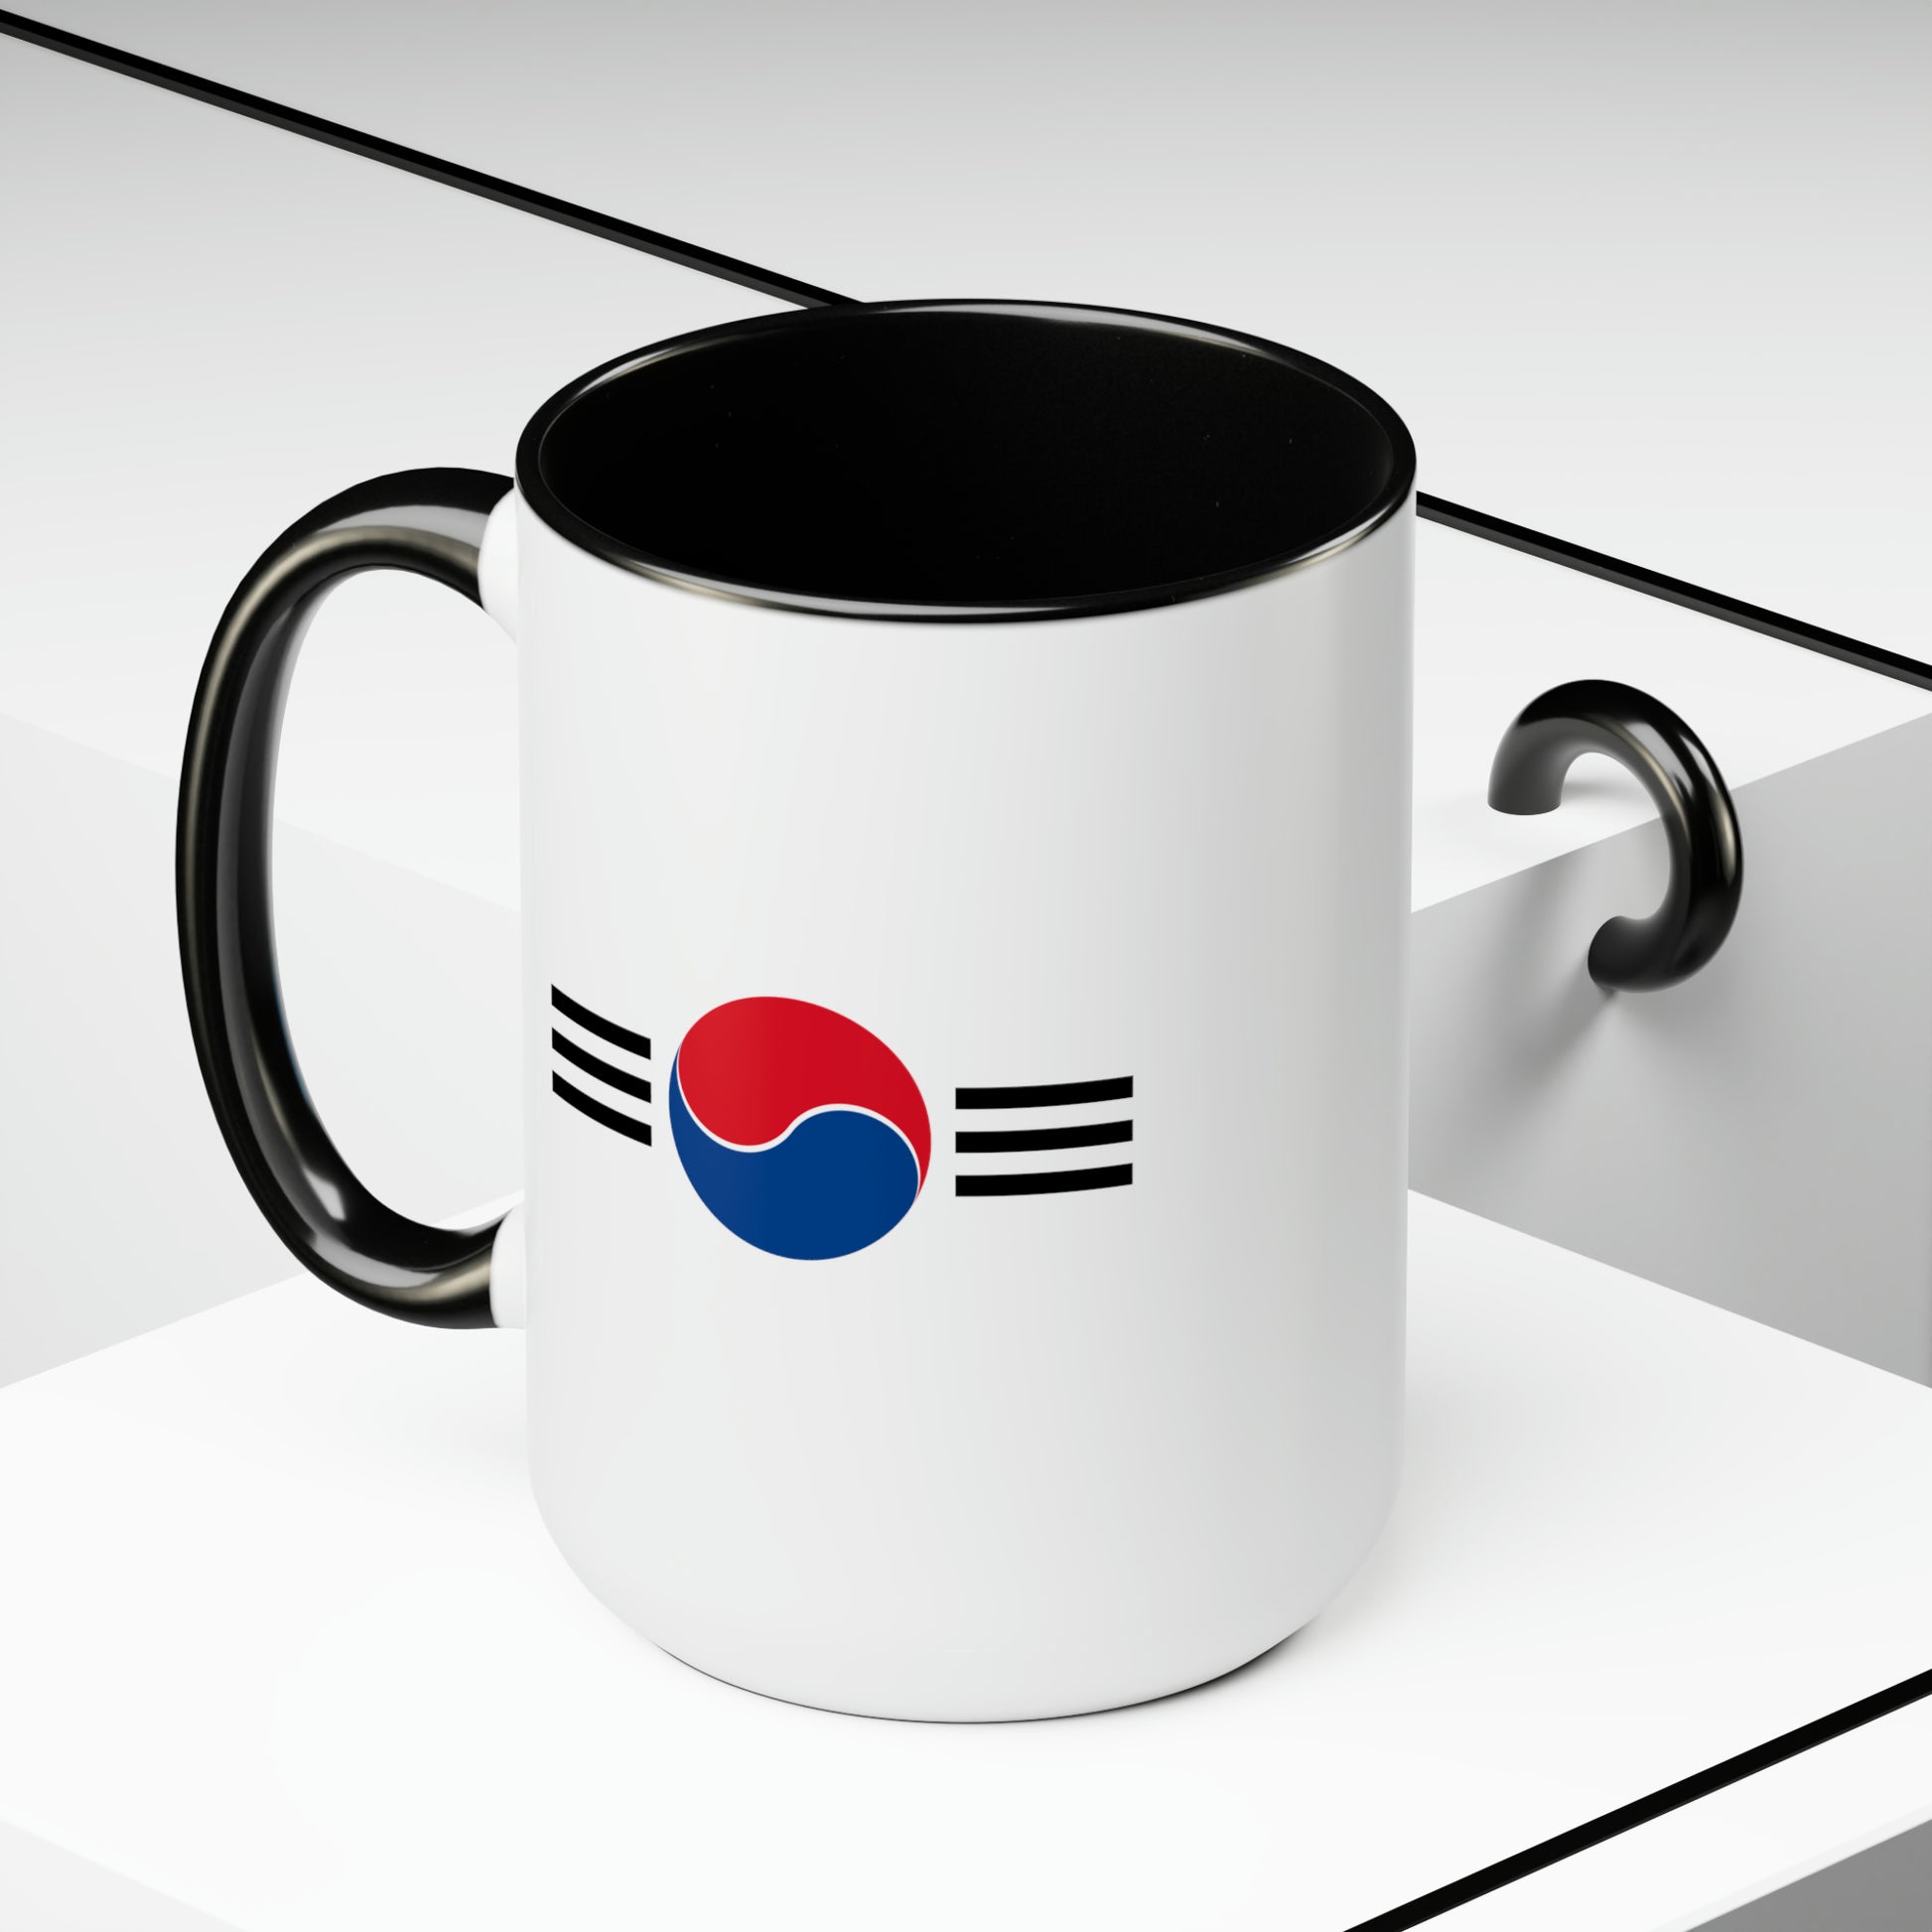 South Korean Air Force Roundel Coffee Mug - Double Sided Black Accent Ceramic 15oz - by TheGlassyLass.com